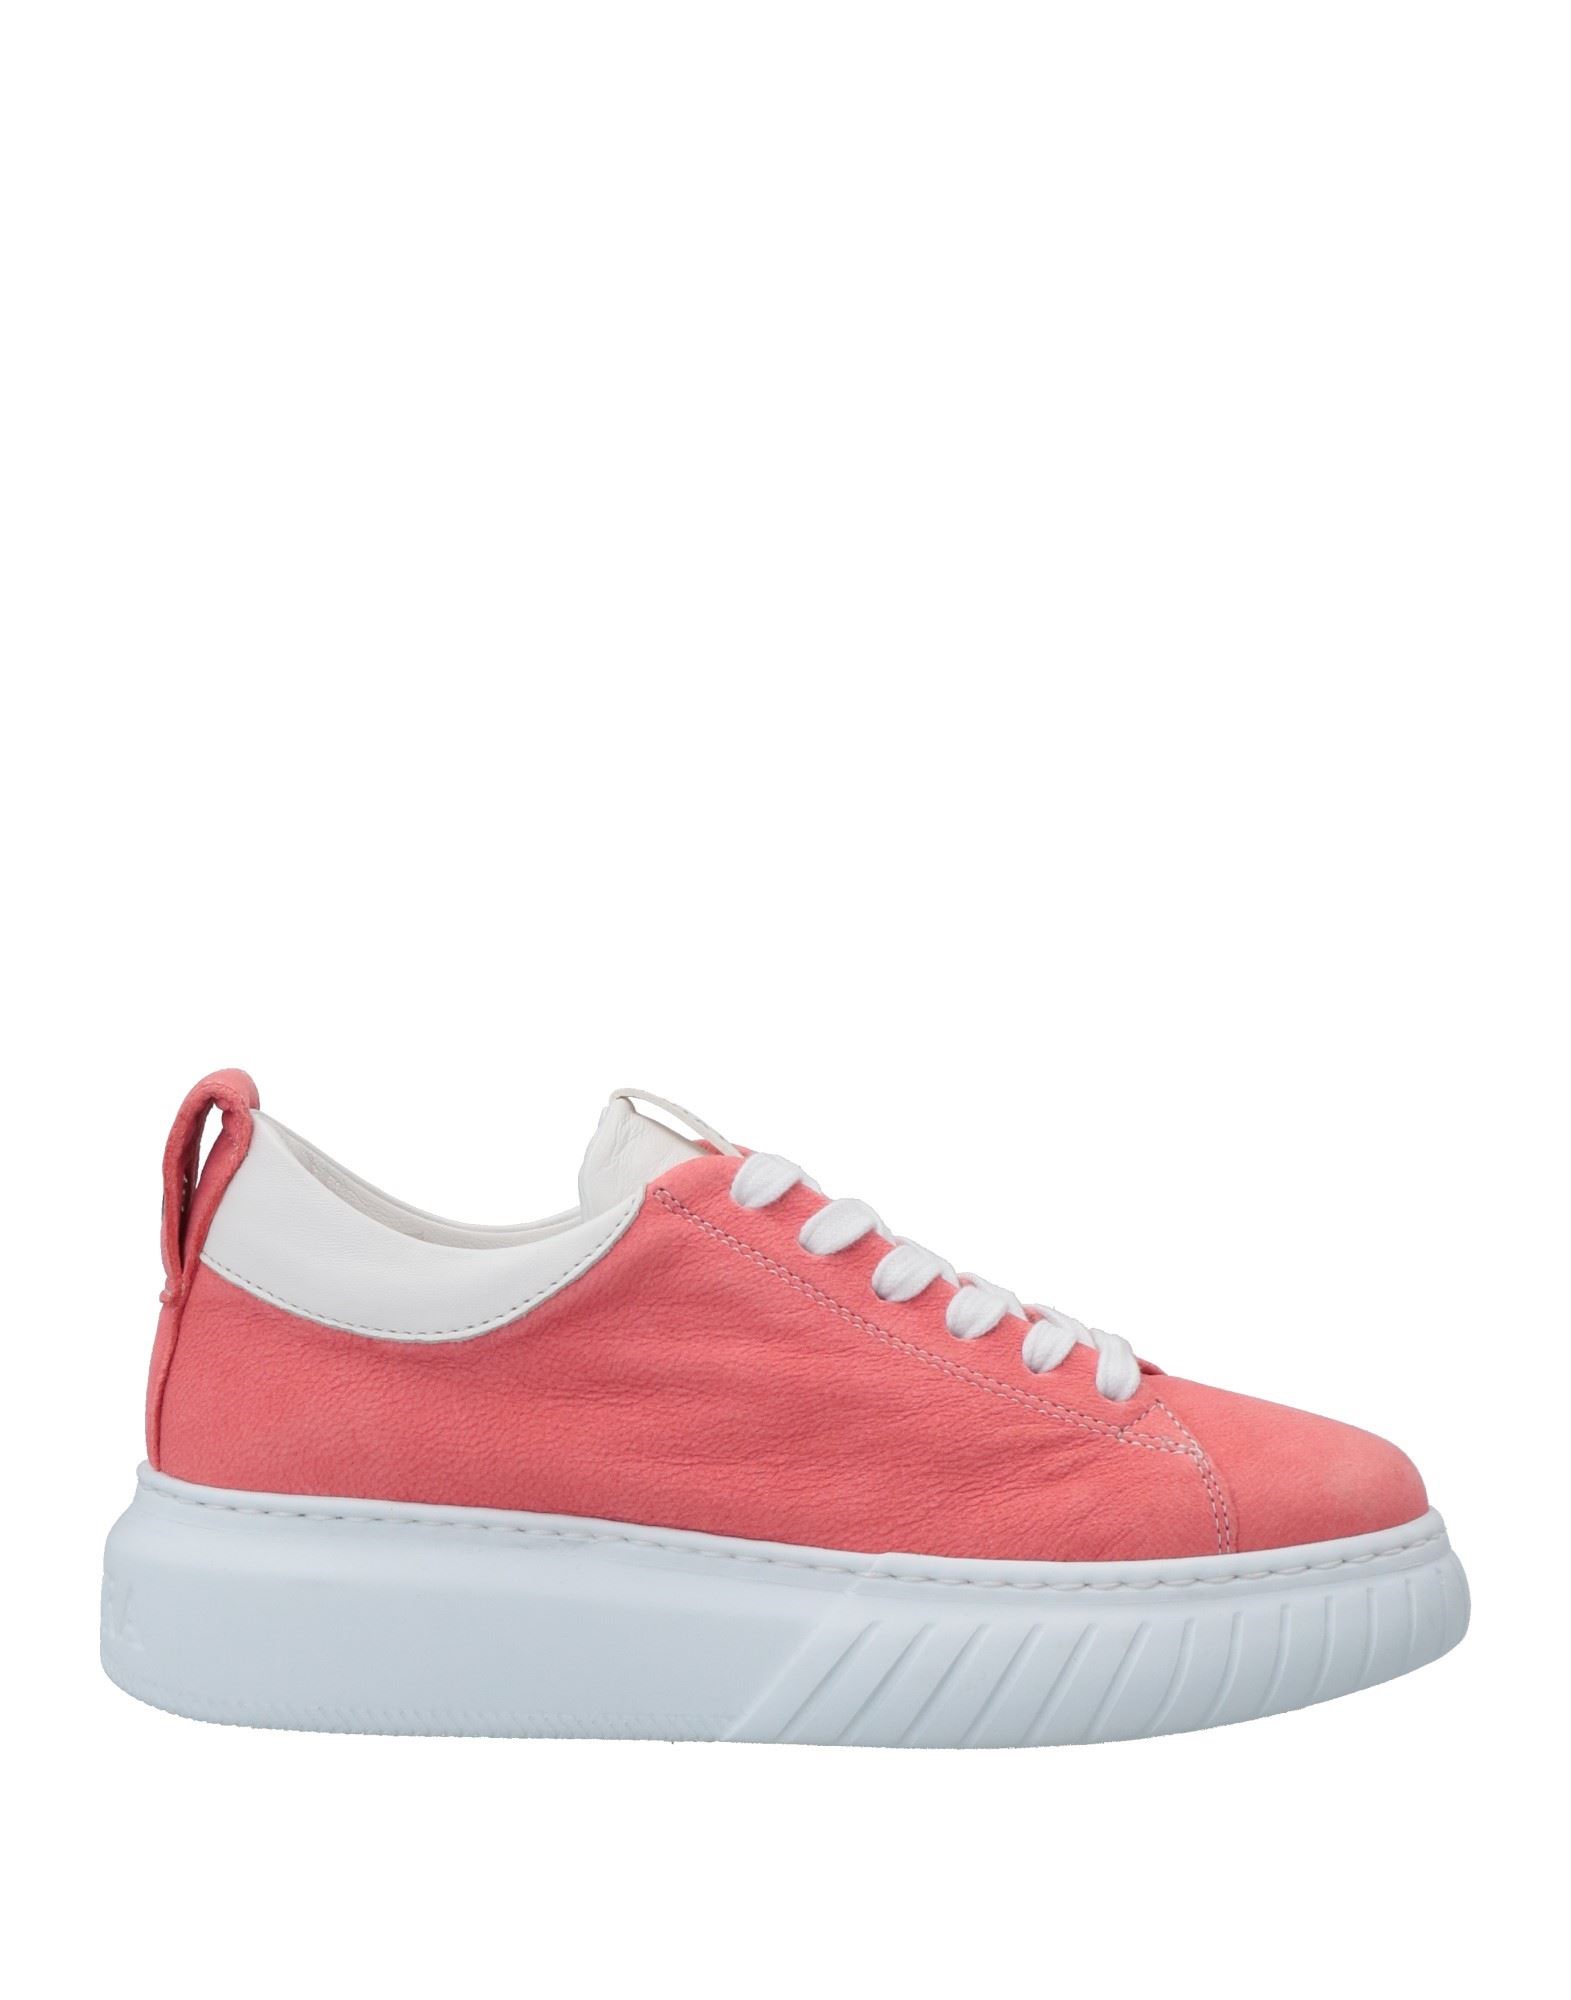 ANDÌA FORA ANDÌA FORA WOMAN SNEAKERS CORAL SIZE 10 SOFT LEATHER